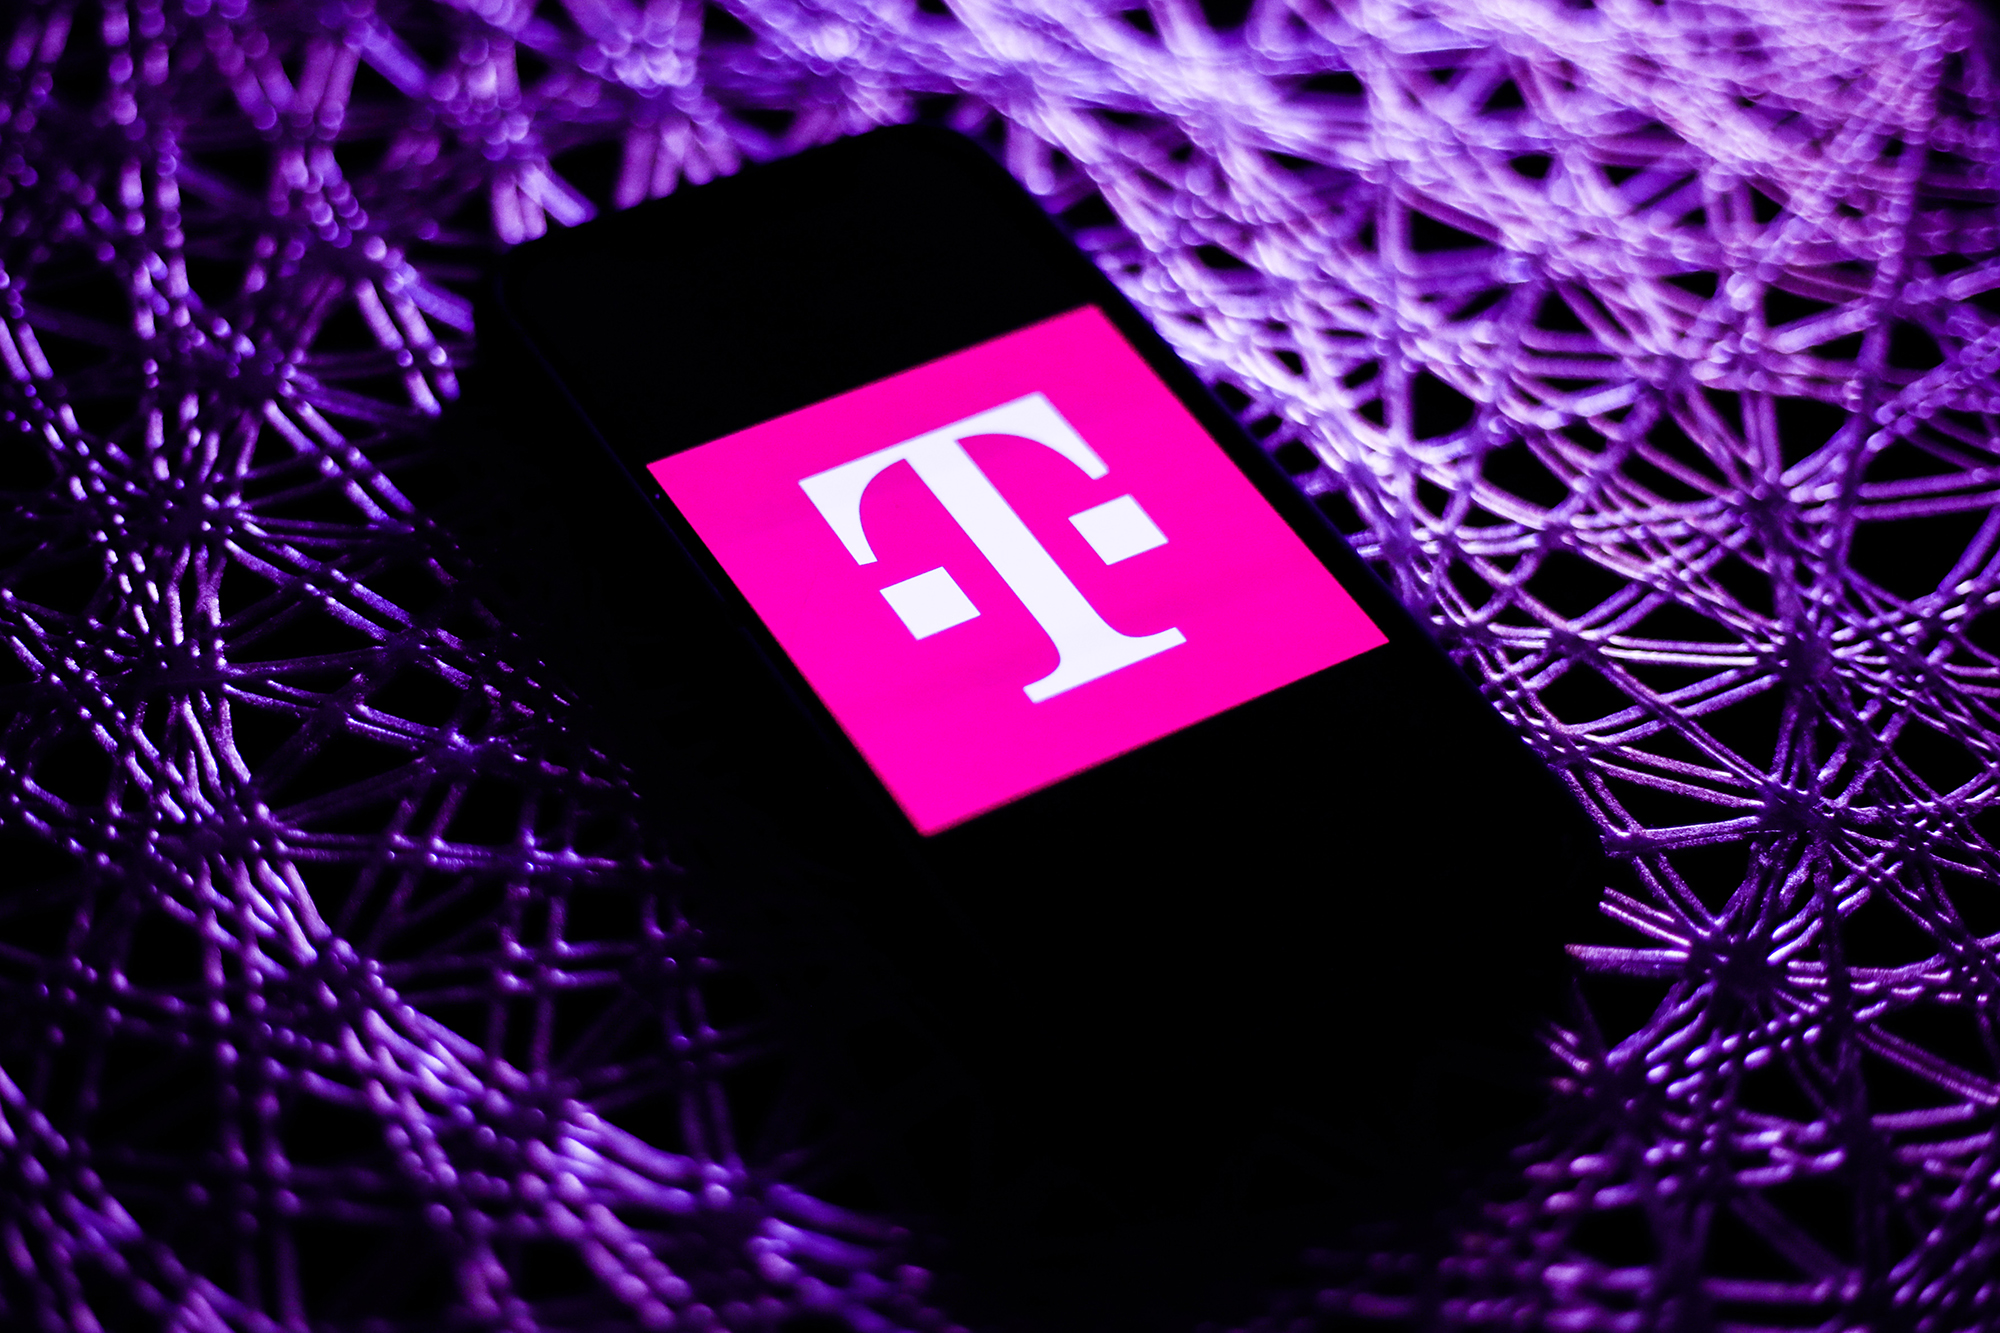 T-Mobile's network is twice as fast as Verizon and AT&T